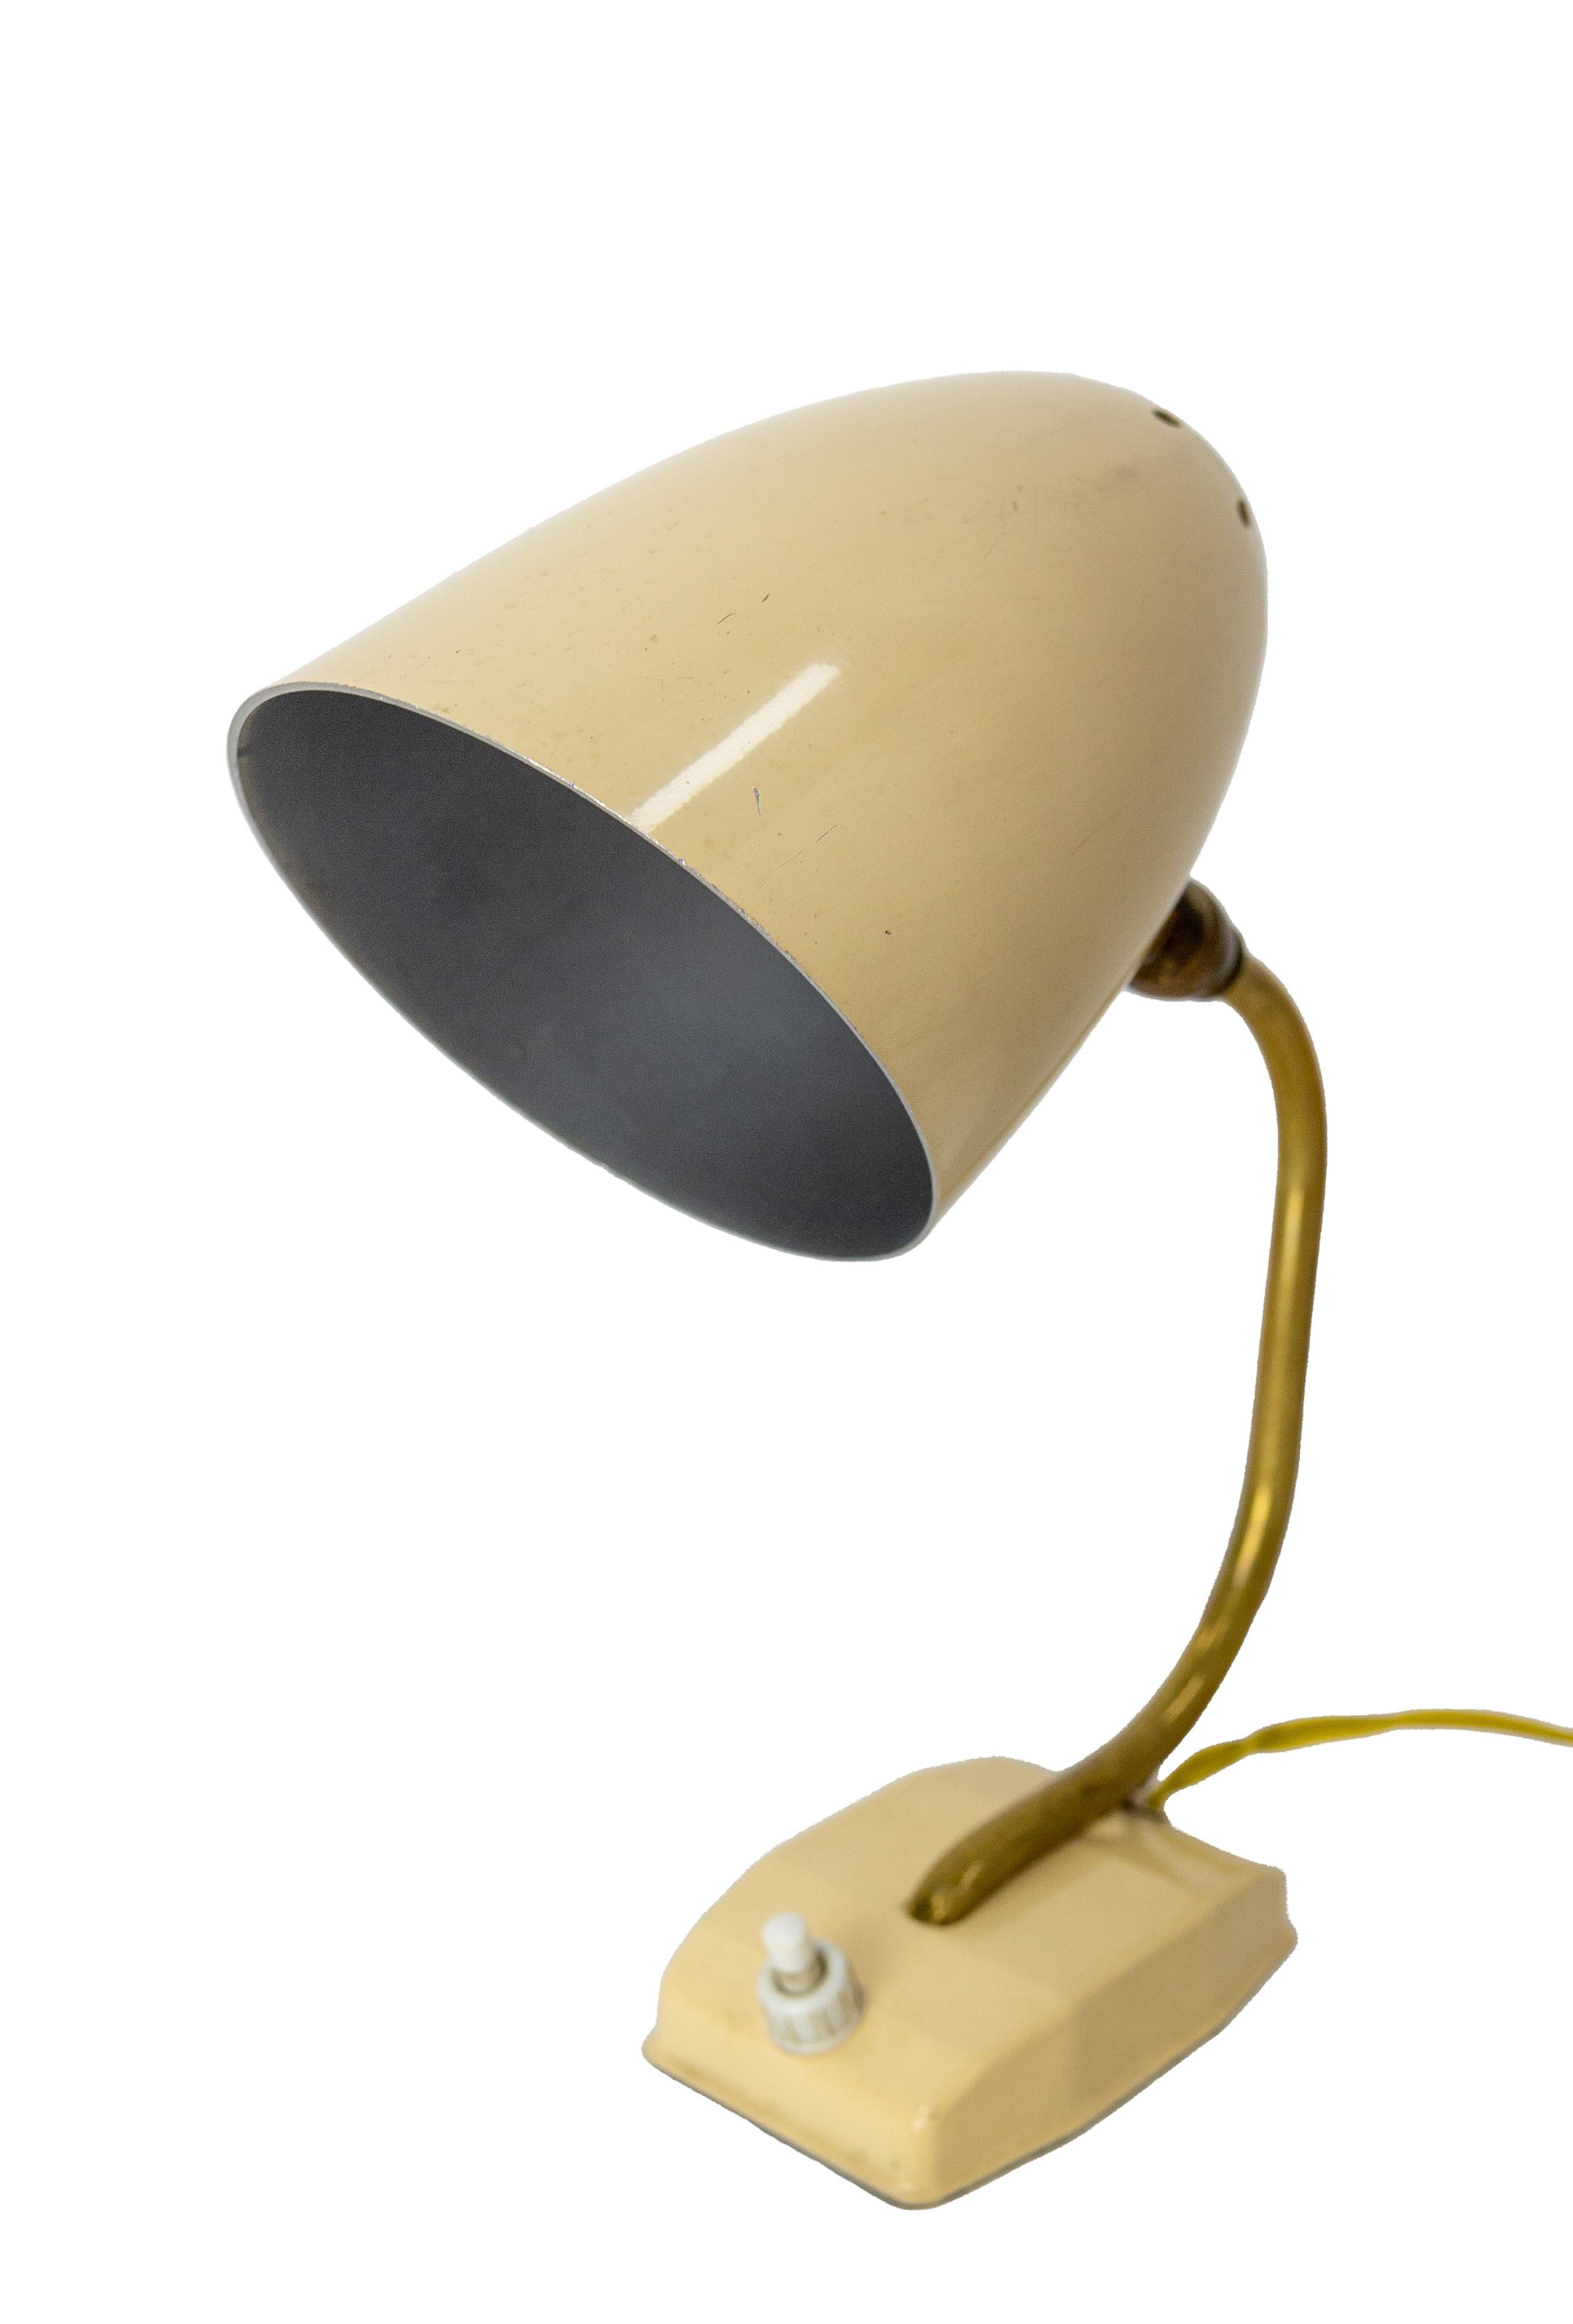 Little desk lamp typical of the vintage years circa 1950
This light is ideal to complete the vintage decoration of a room, especially in small spaces.
Good vintage condition.
These can be rewired to USA and EU or UK standards.

Shipping;L15,5 P9 H20